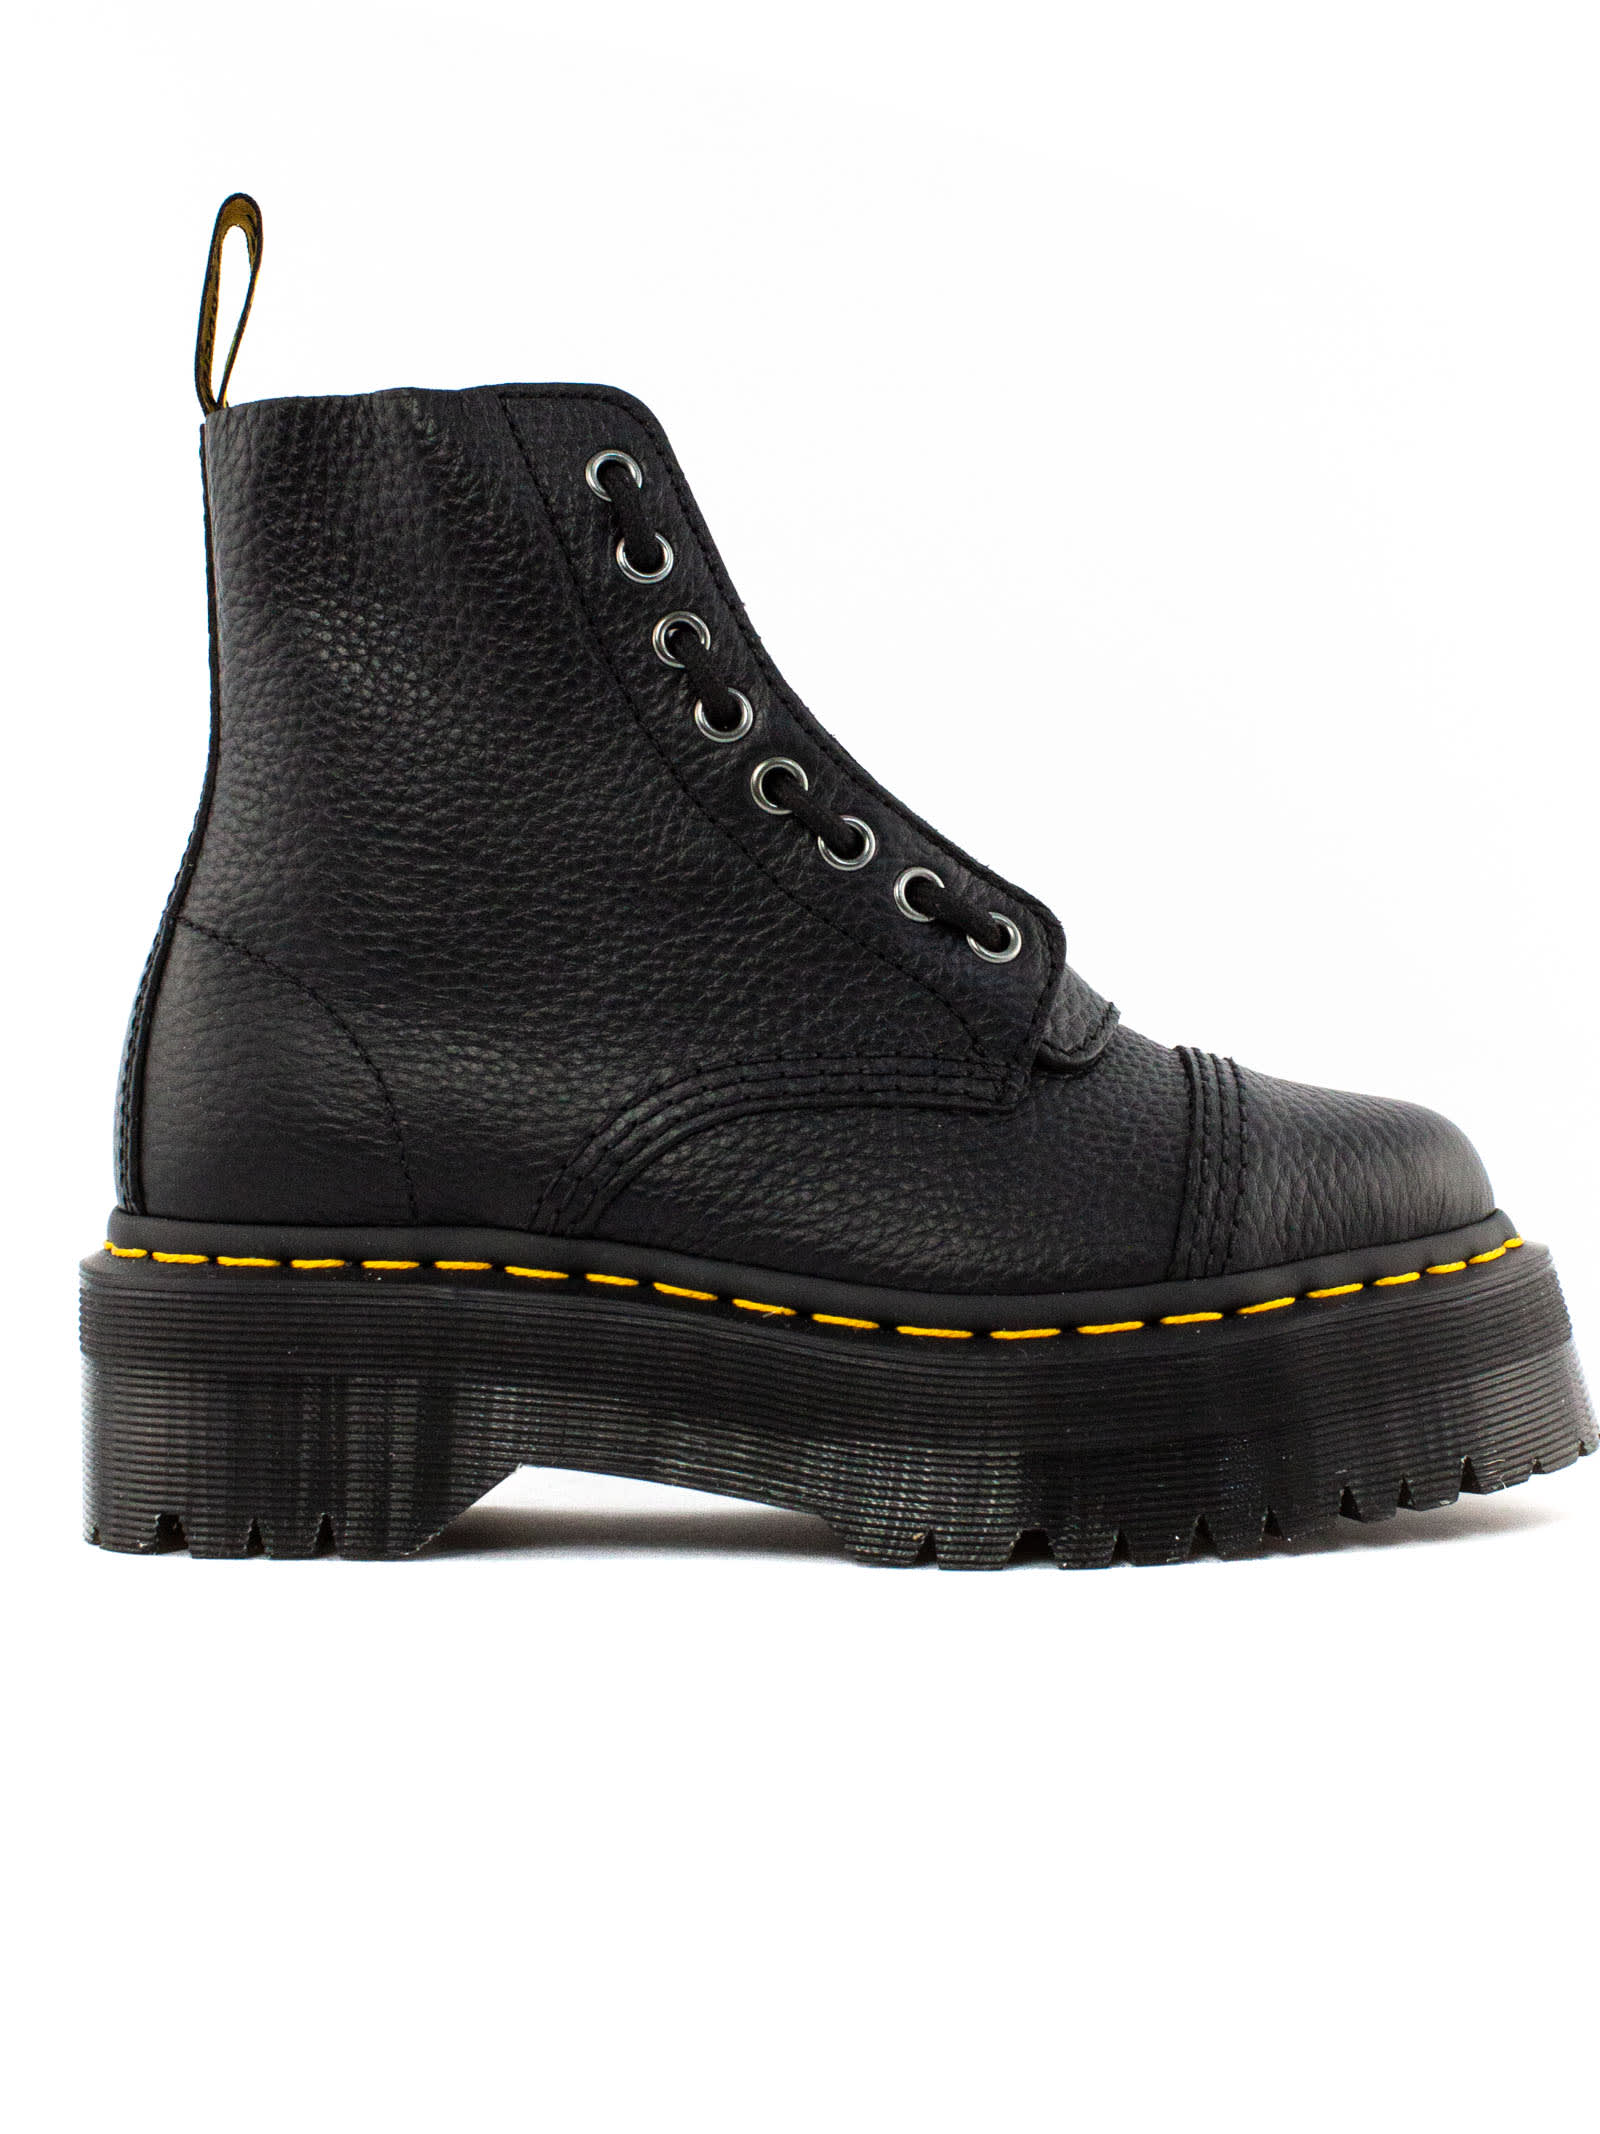 Dr. Martens Black Grained Nappa Sinclair Boots